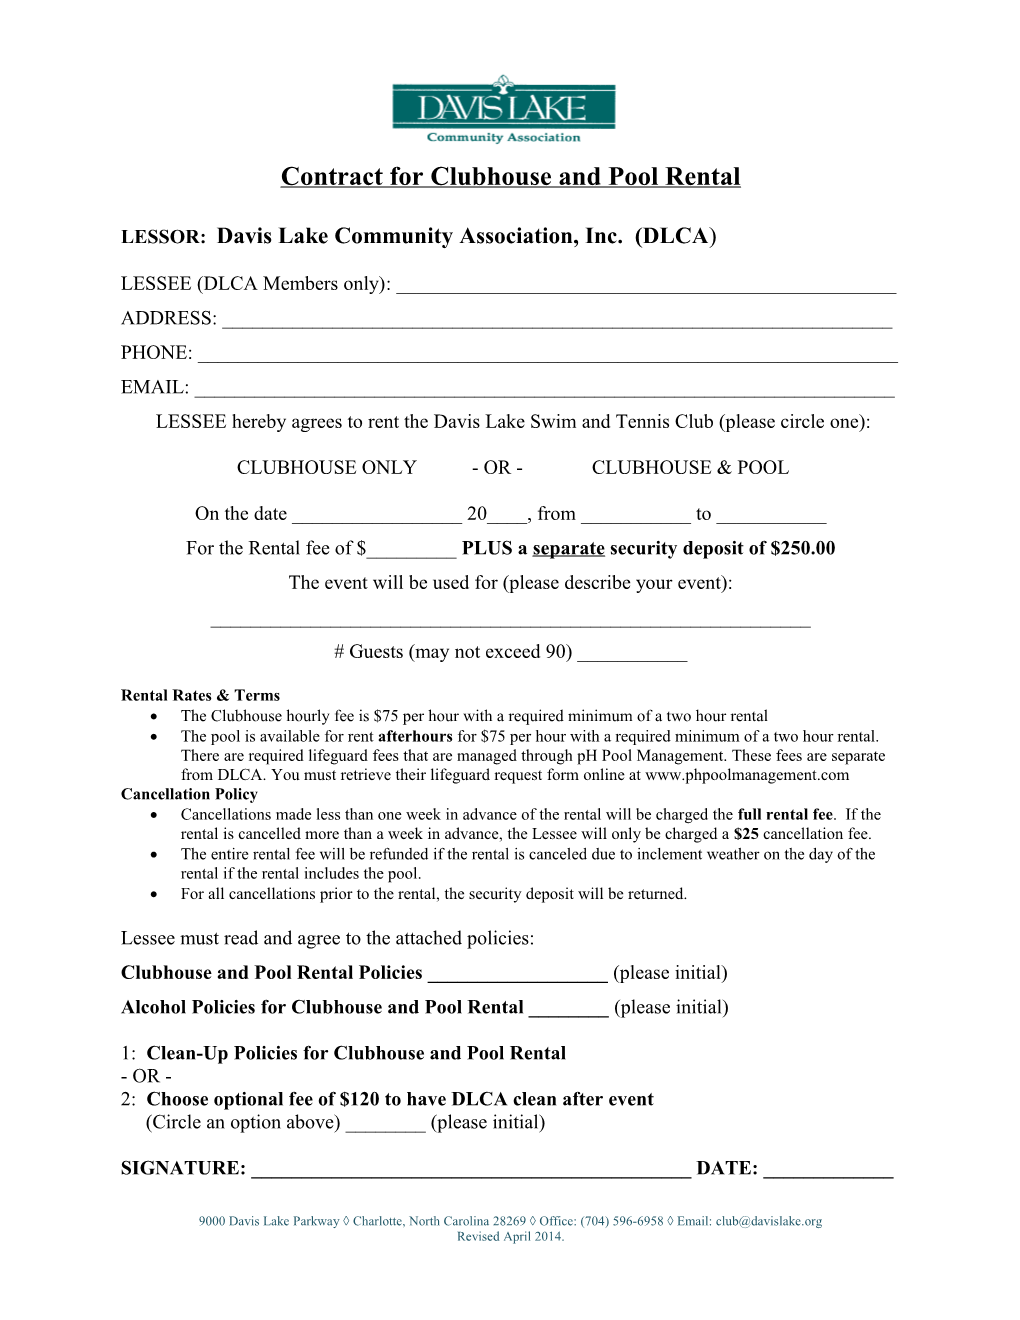 Contract for Clubhouse and Pool Rental